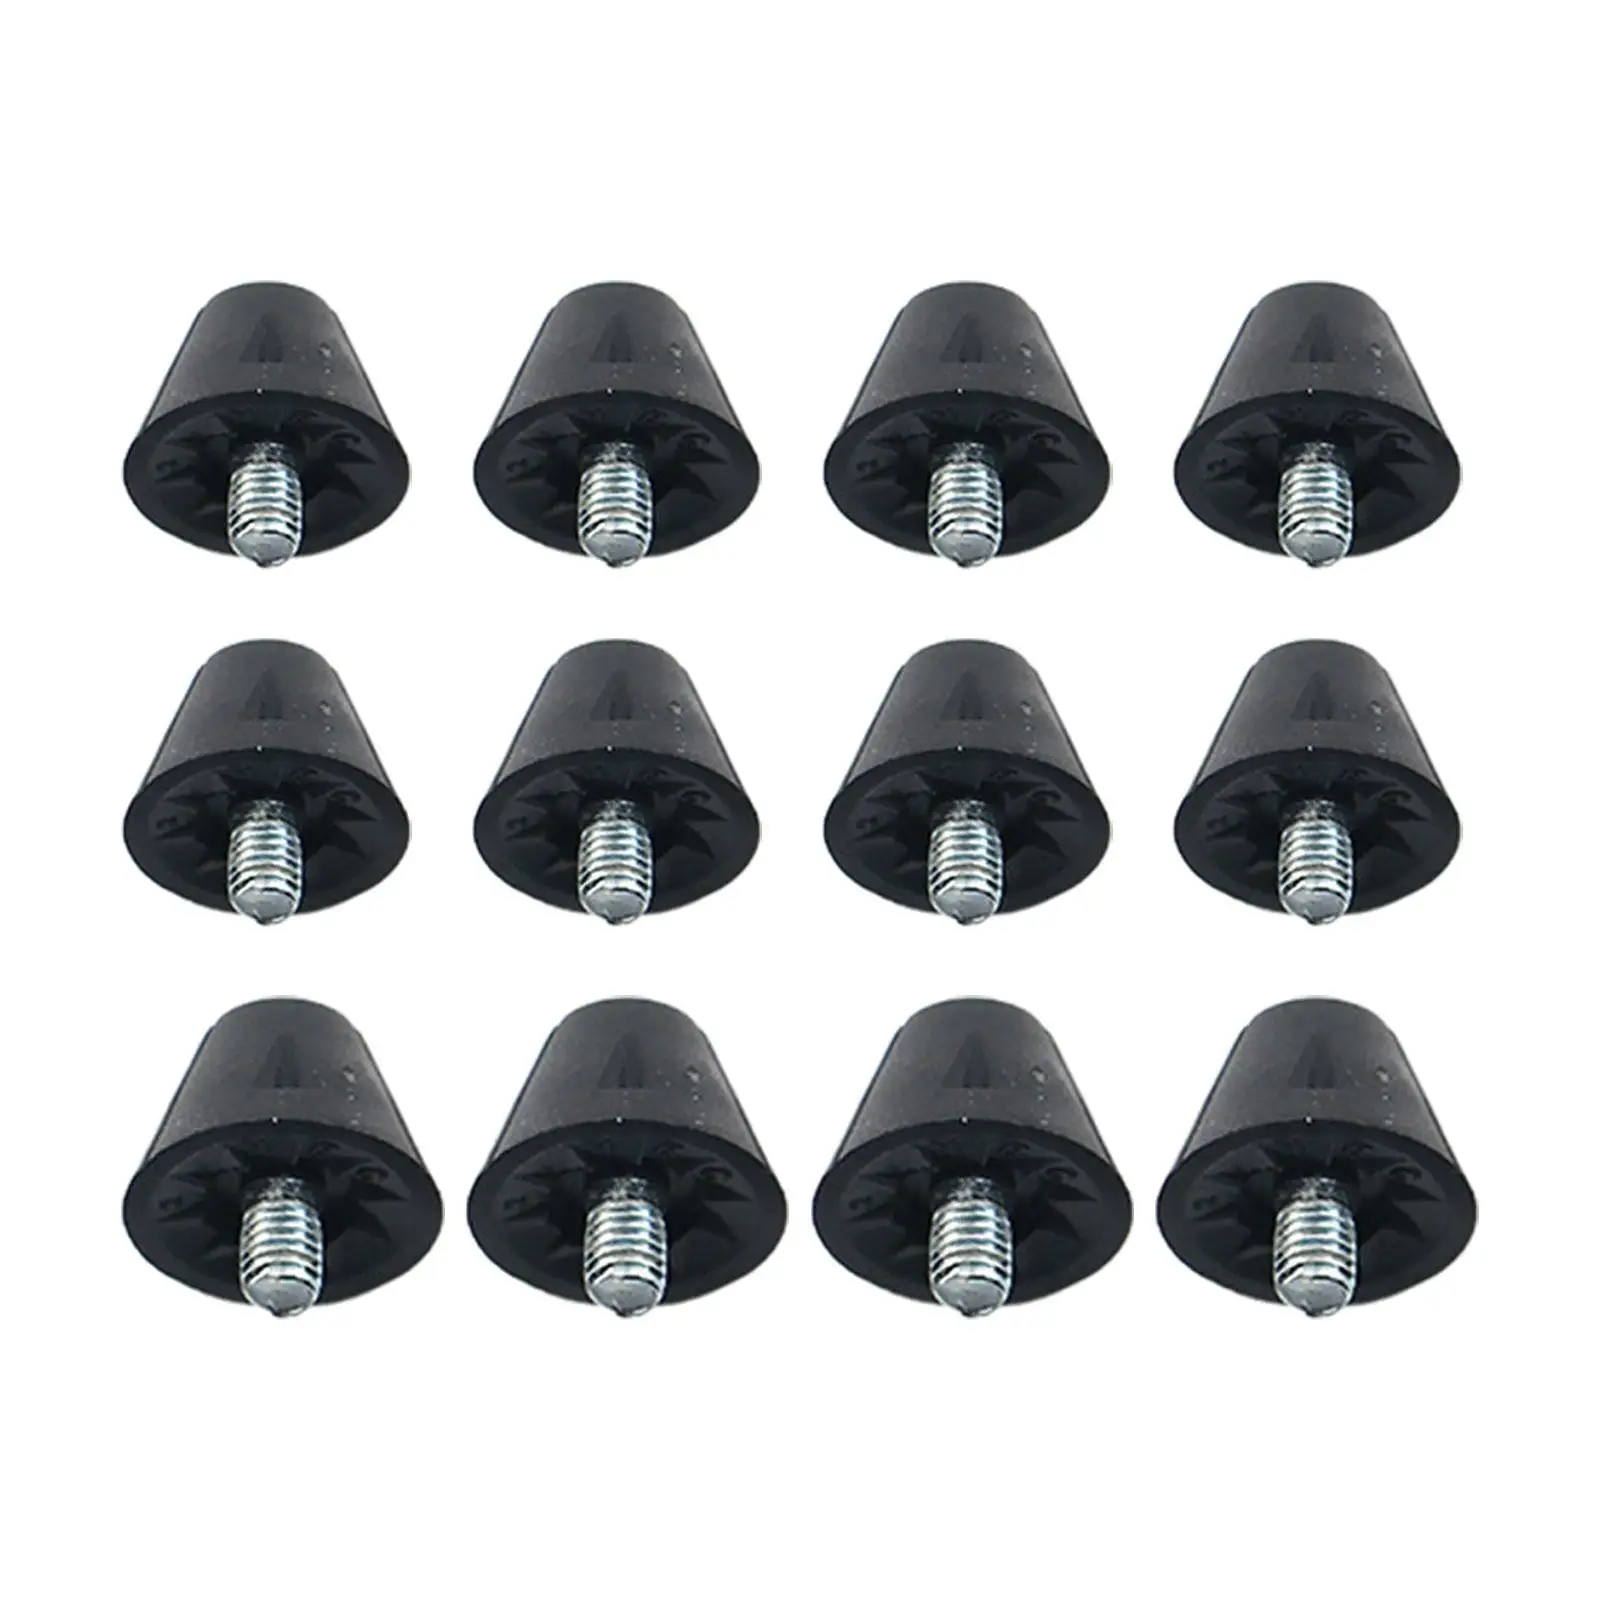 12x Football Shoe Spikes M5 Anti Slip Portable Turf Rugby Studs for Athletic Sneakers Training Indoor Outdoor Sports Competition